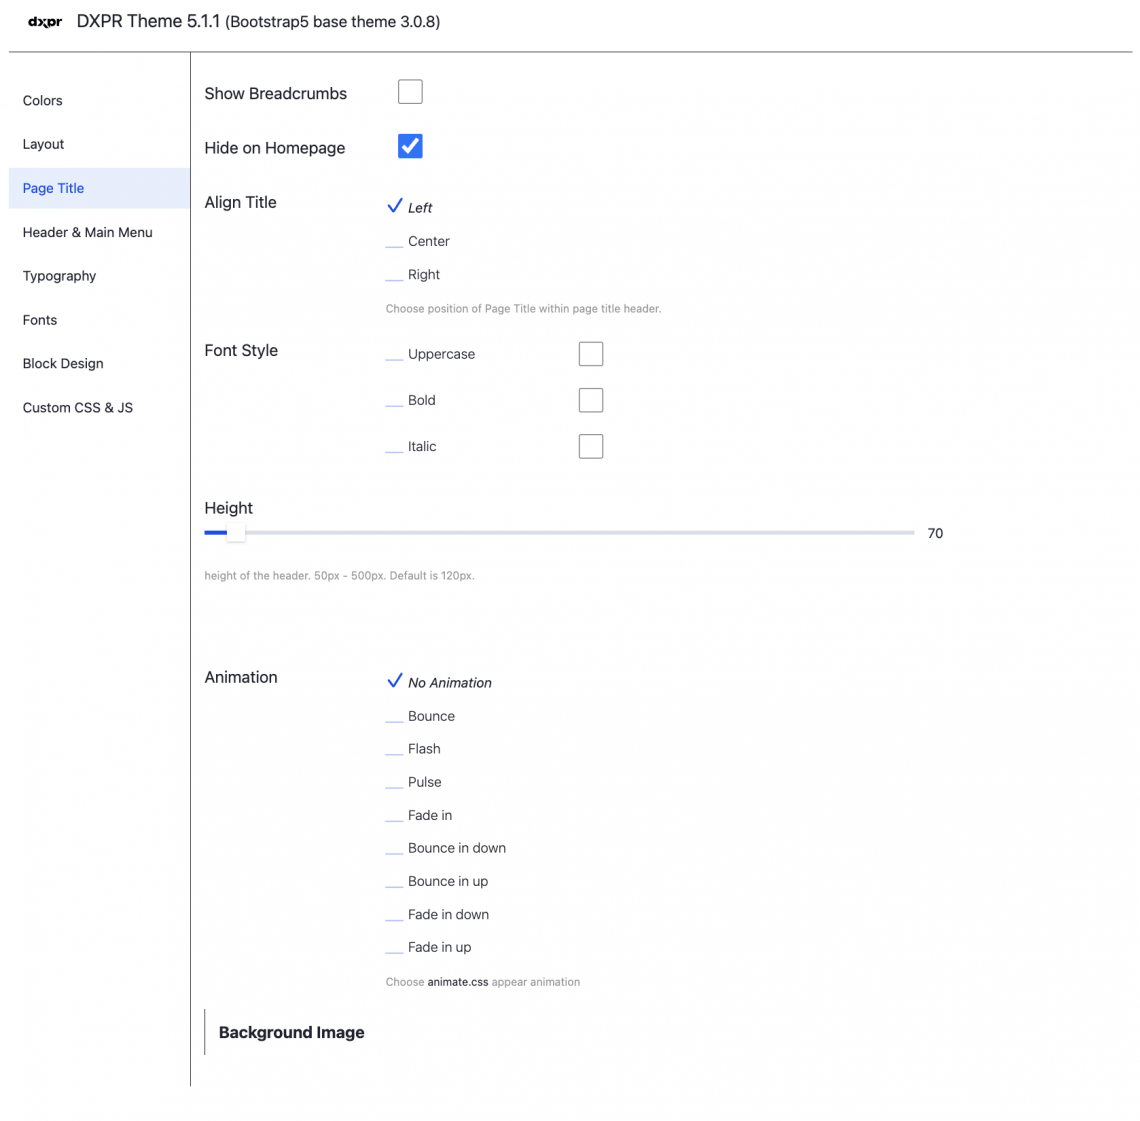 DXPR Theme Page Title Settings